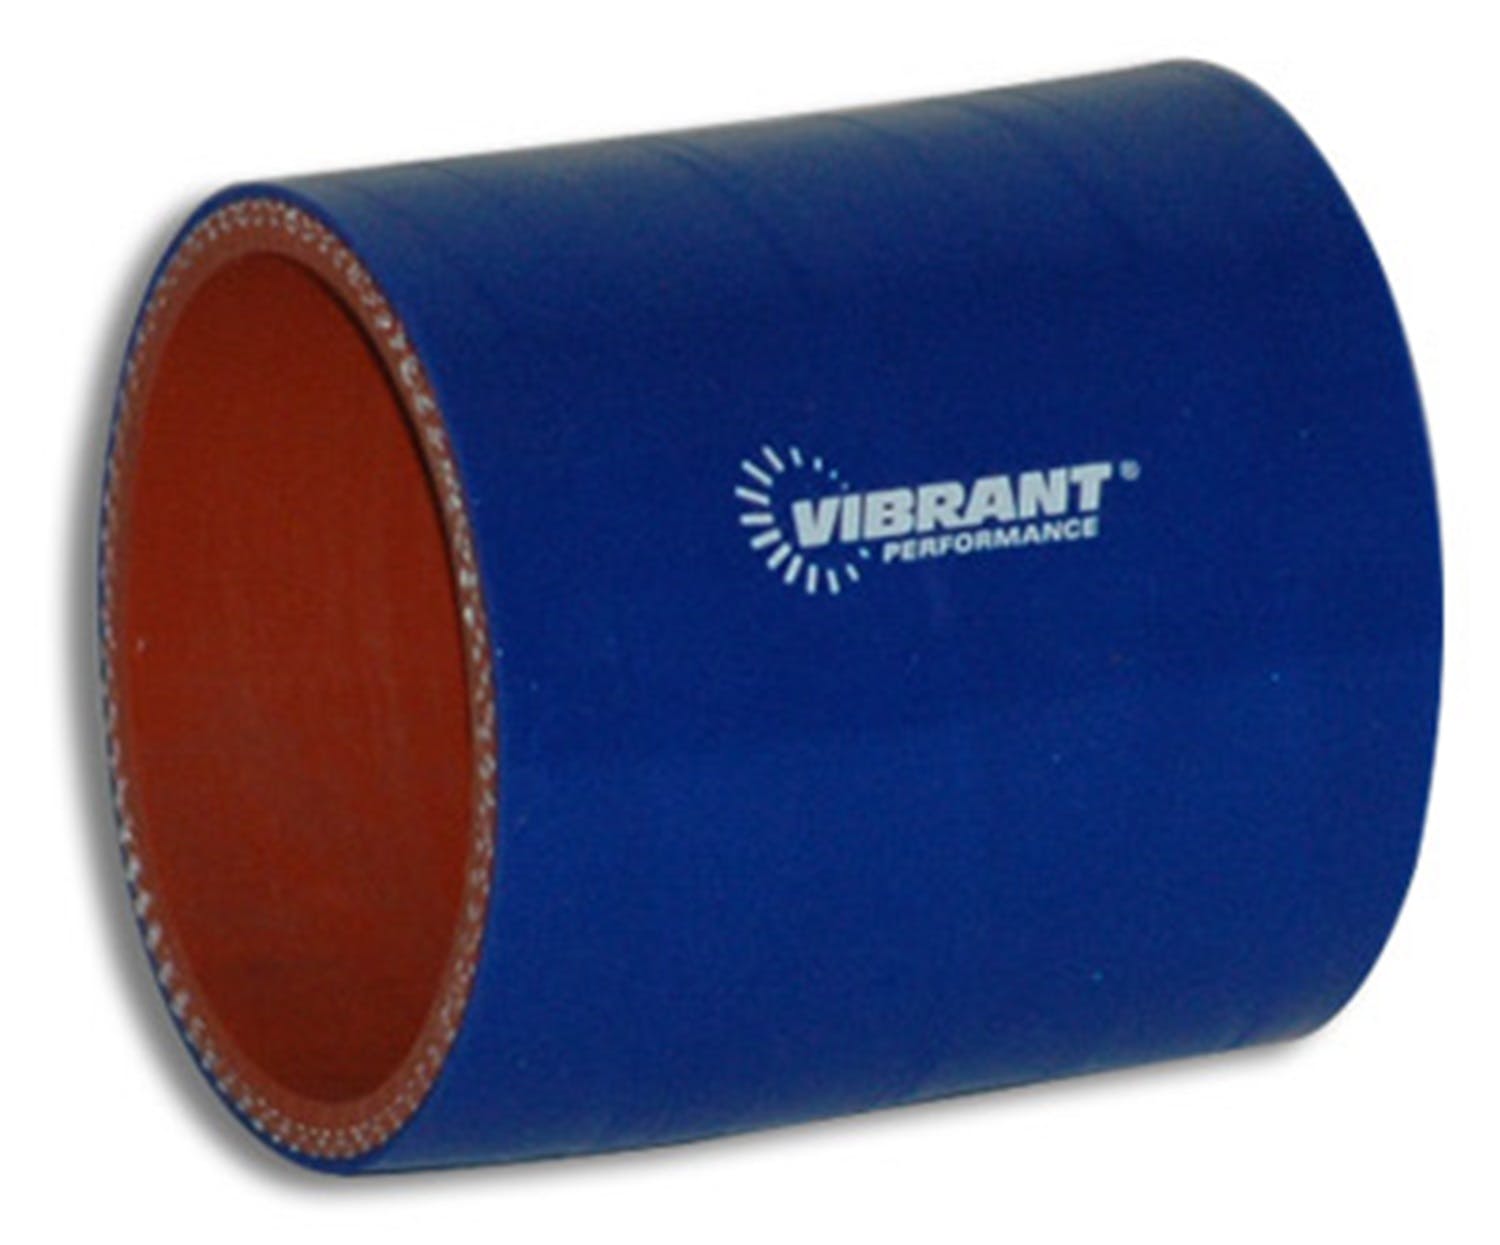 Vibrant Performance 2712B 4 Ply Silicone Sleeve, 2.75 inch I.D. x 3 inch Long - Blue